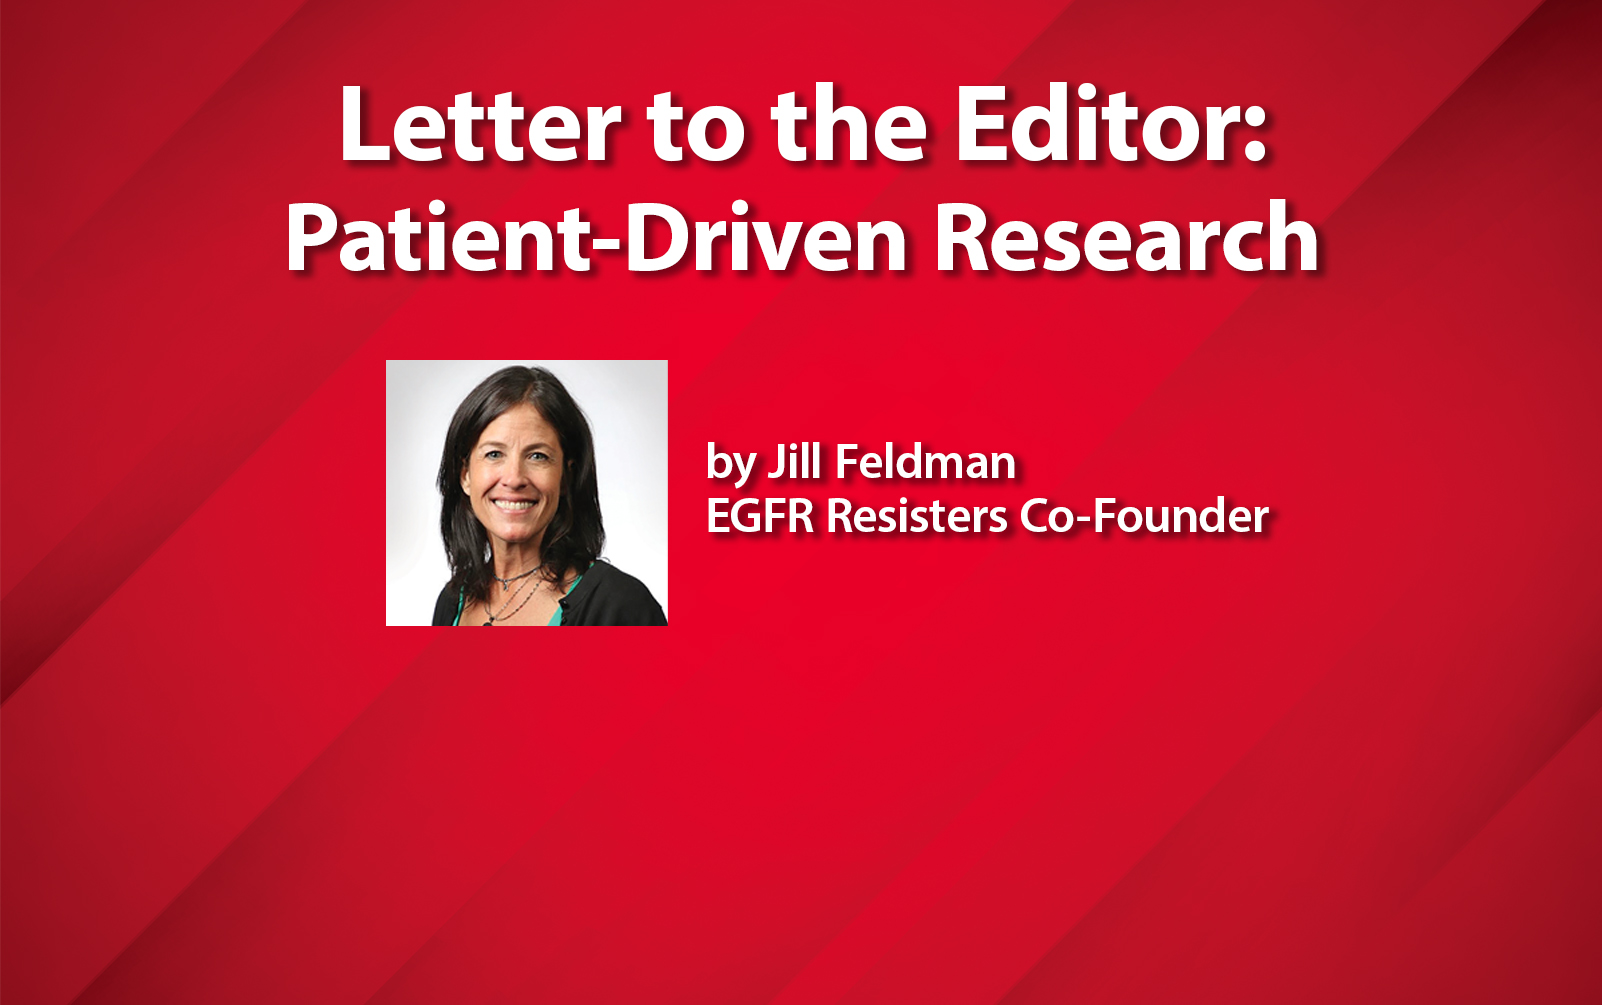 Letter to the Editor: Patient-Driven Research